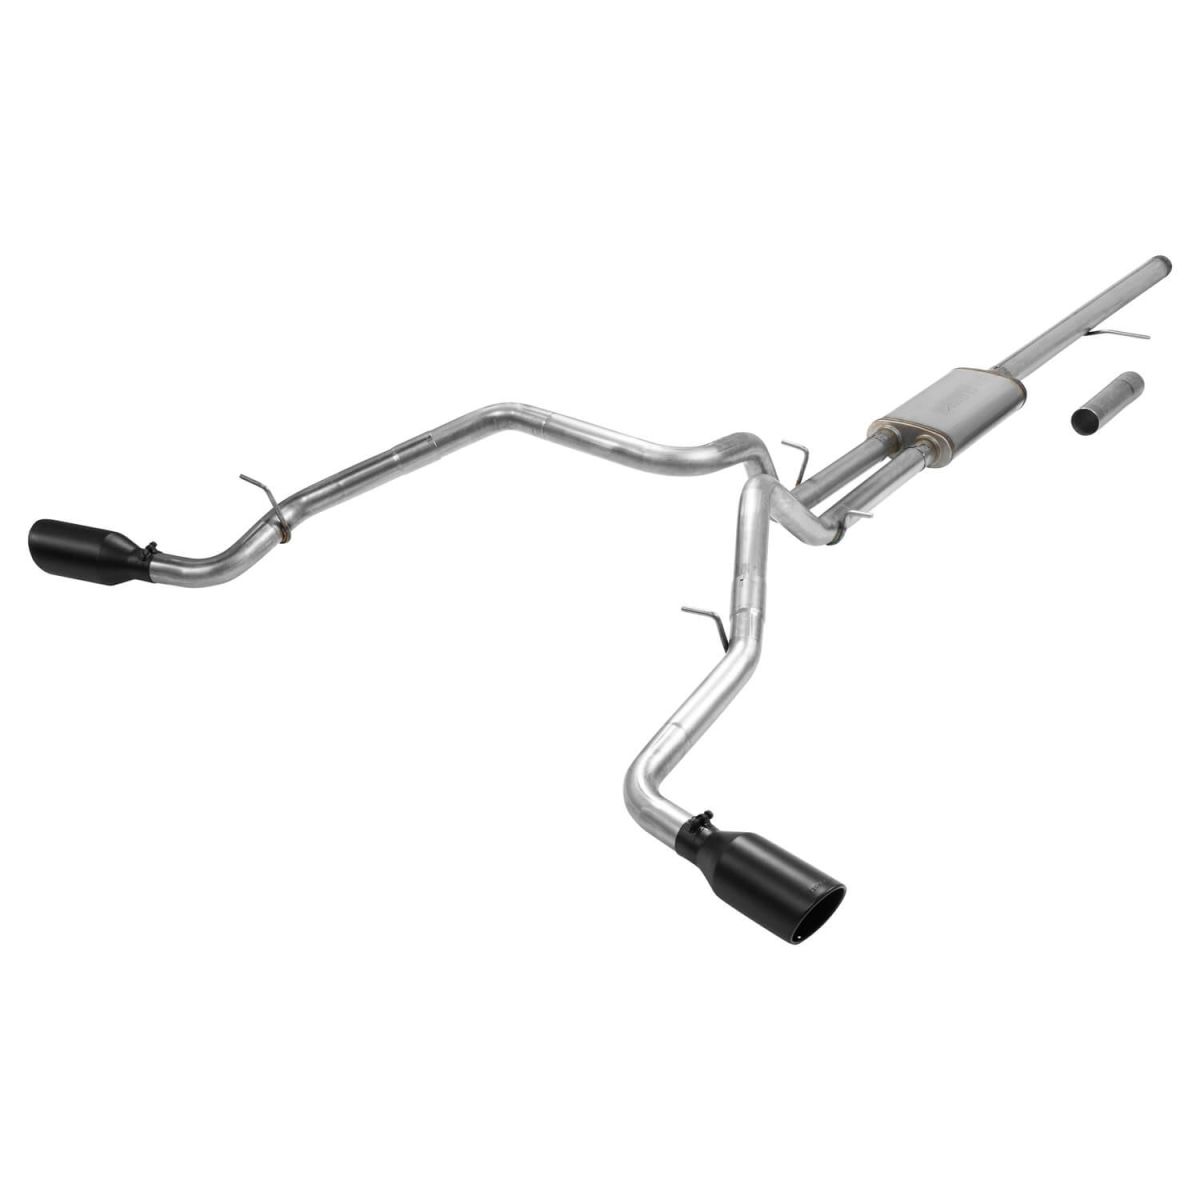 Flowmaster - Flowmaster FlowFX Dual Exit Cat-Back Exhaust System For 2019-2021 GM 1500 5.3L